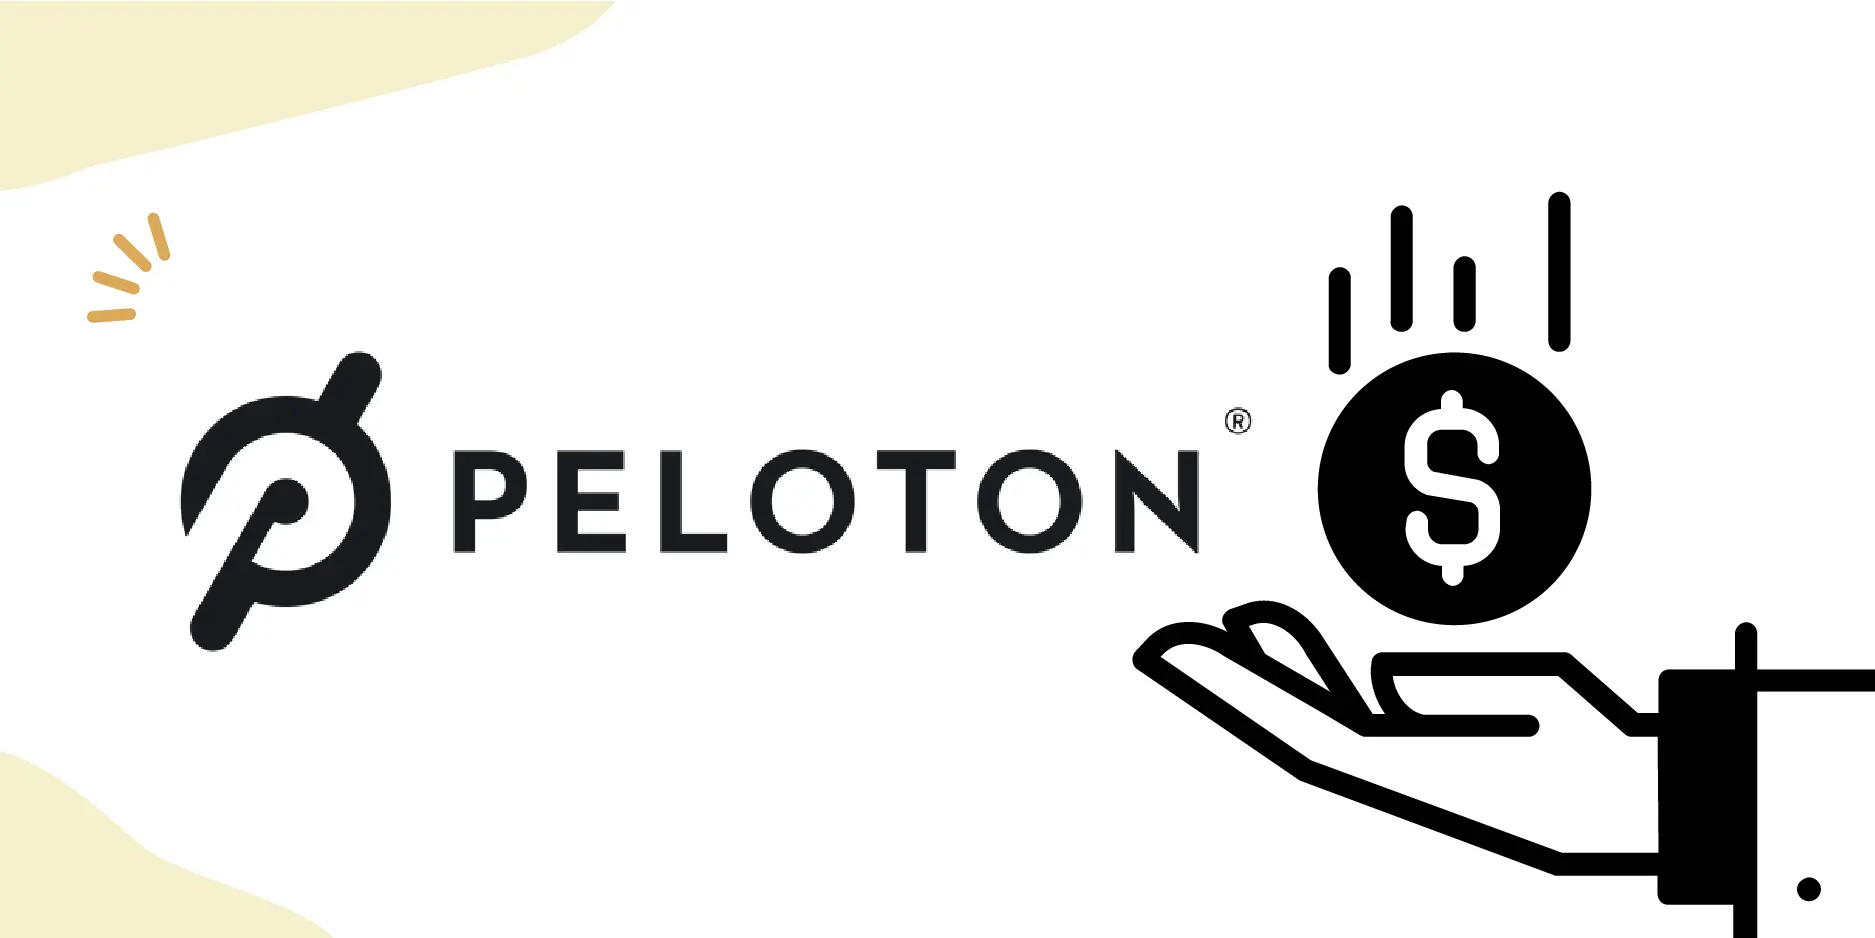 Why is Peloton So Expensive